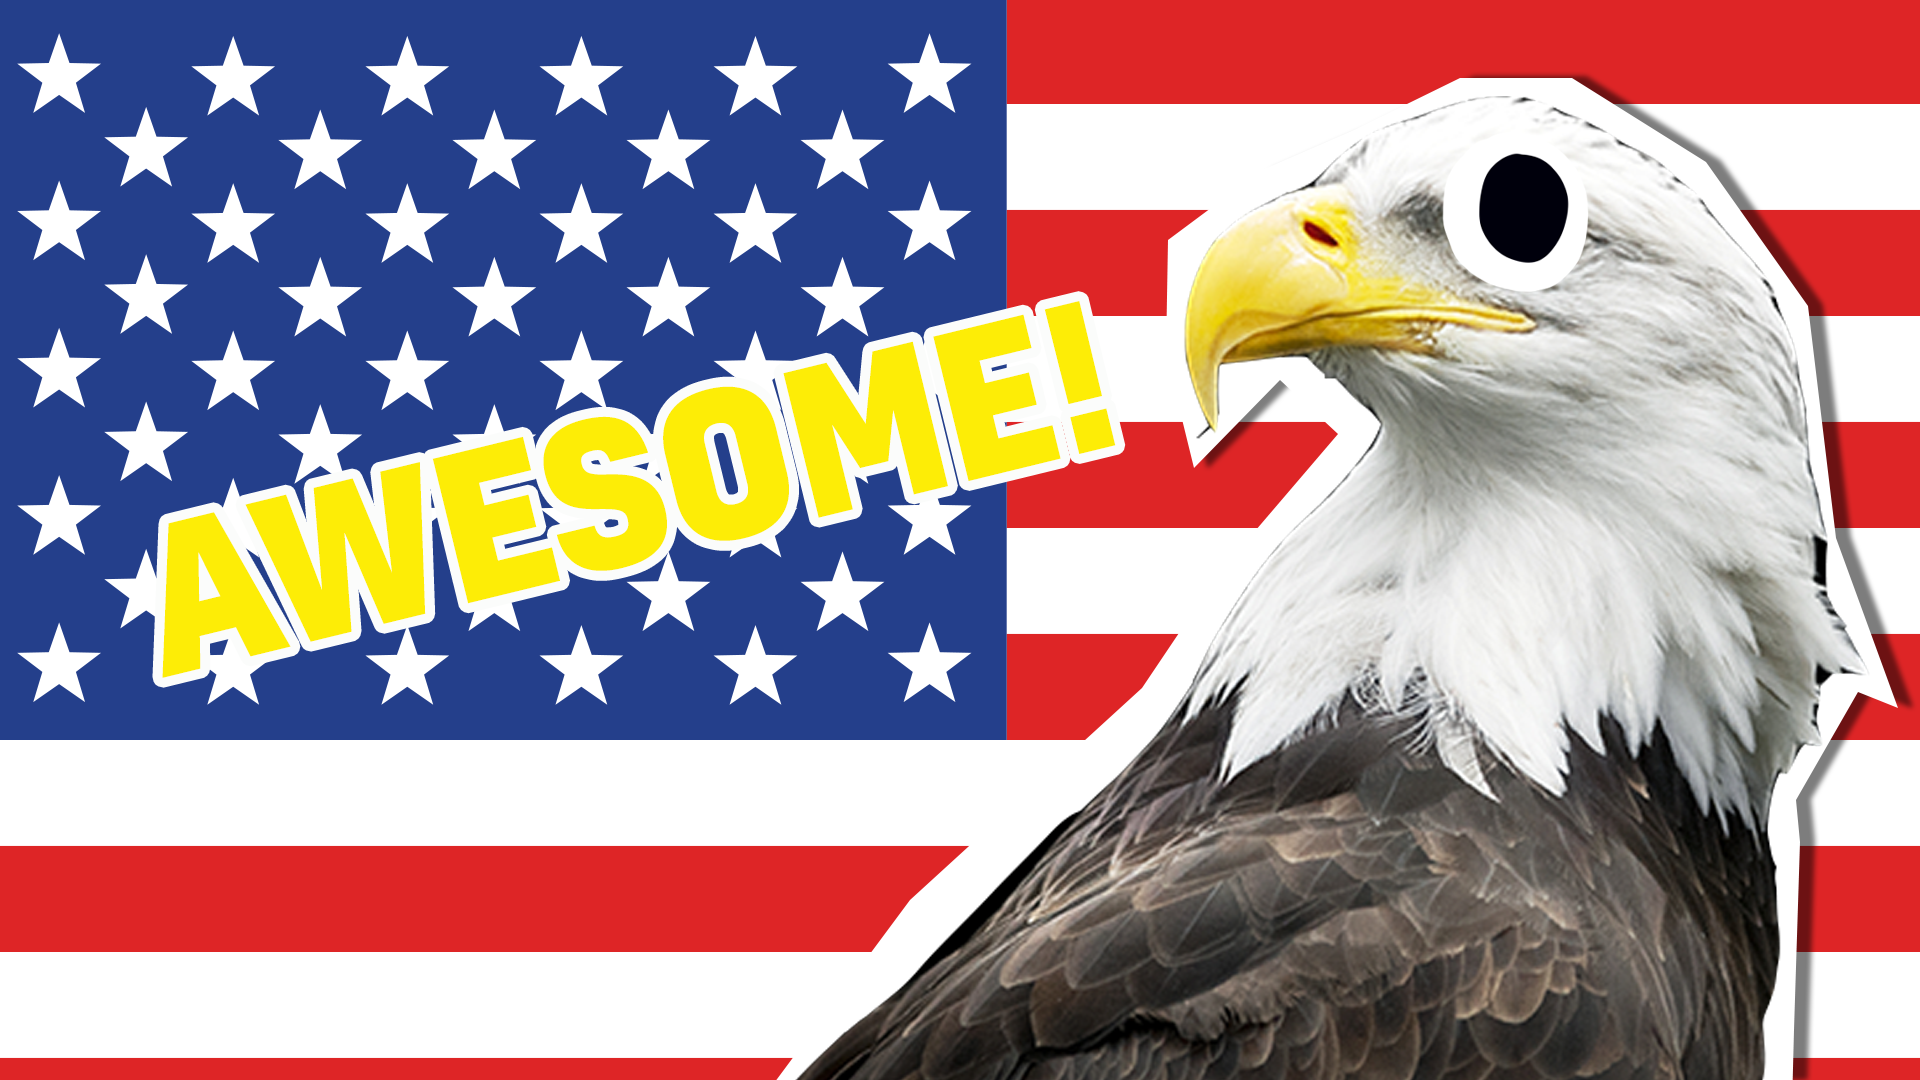 Yee haw! You got 100%! That means you're a bona fide American historian, congratulations! This eagle is seriously impressed. 